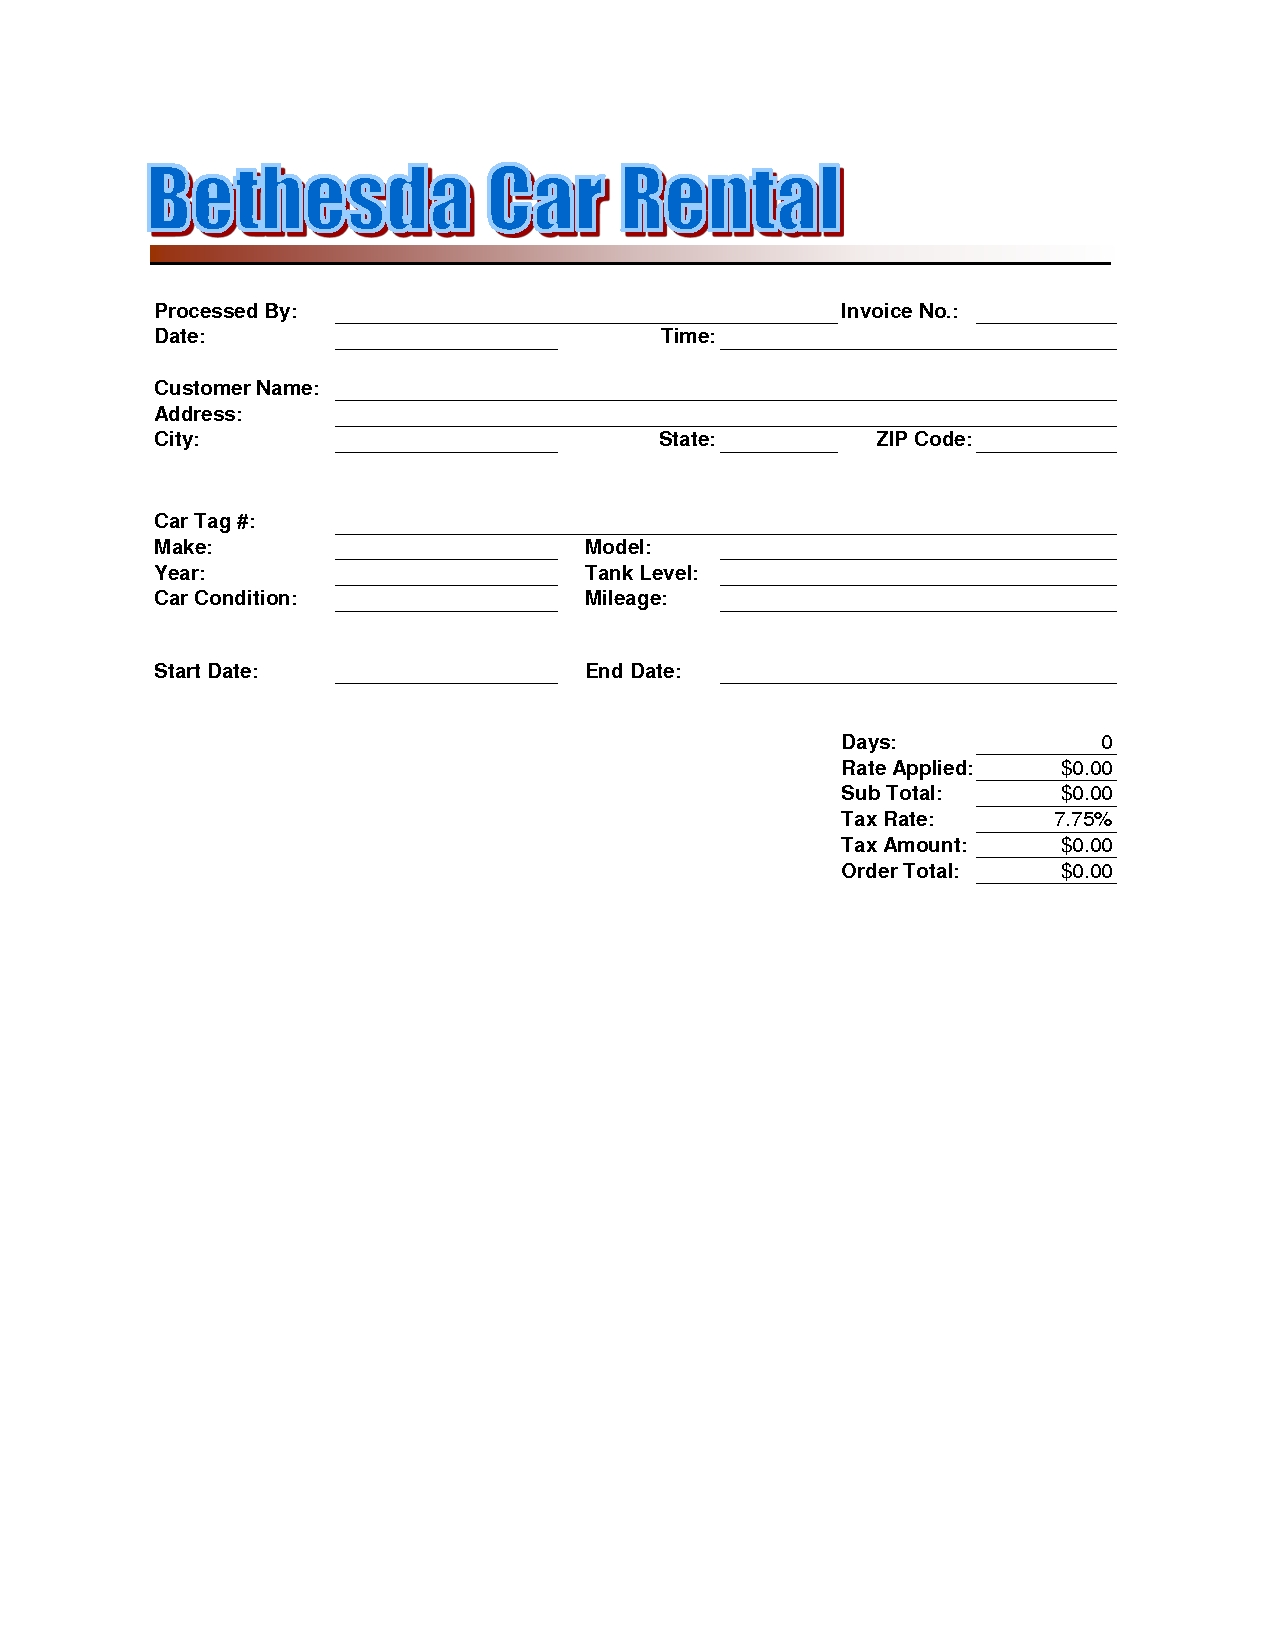 Invoice For Rent Payment